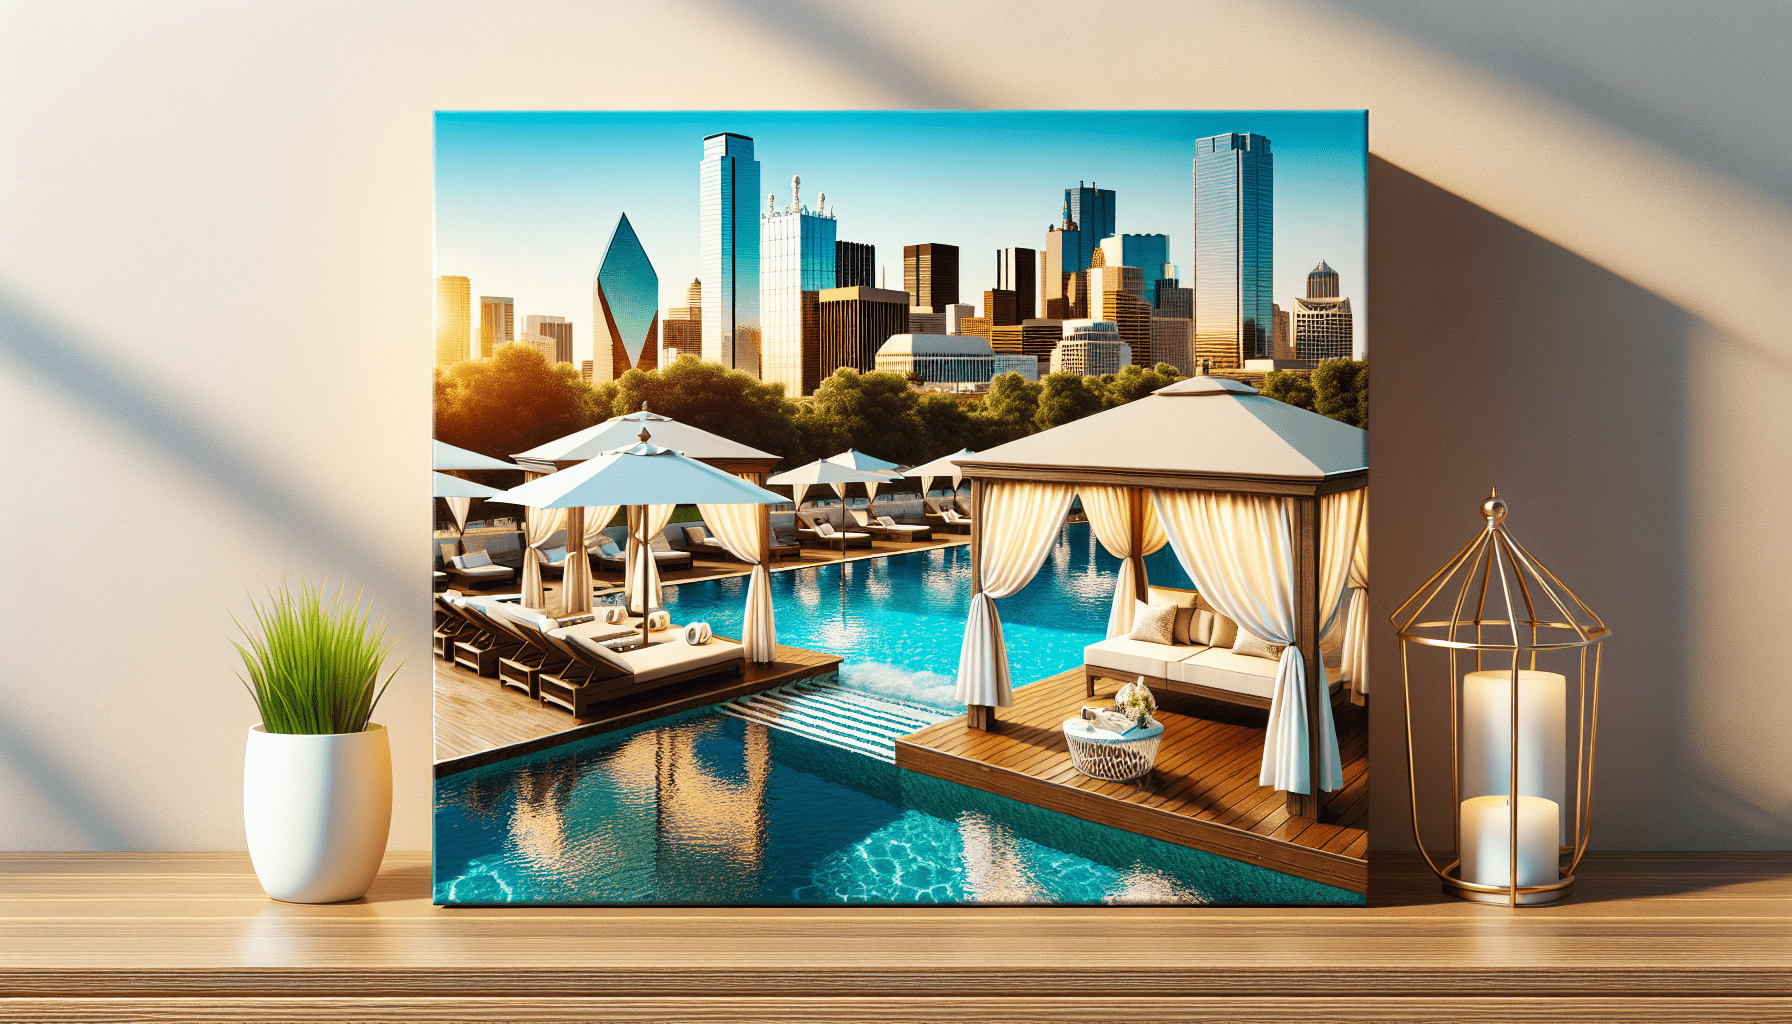 Which Dallas Hotels Have Outdoor Pools With Cabana Rentals?